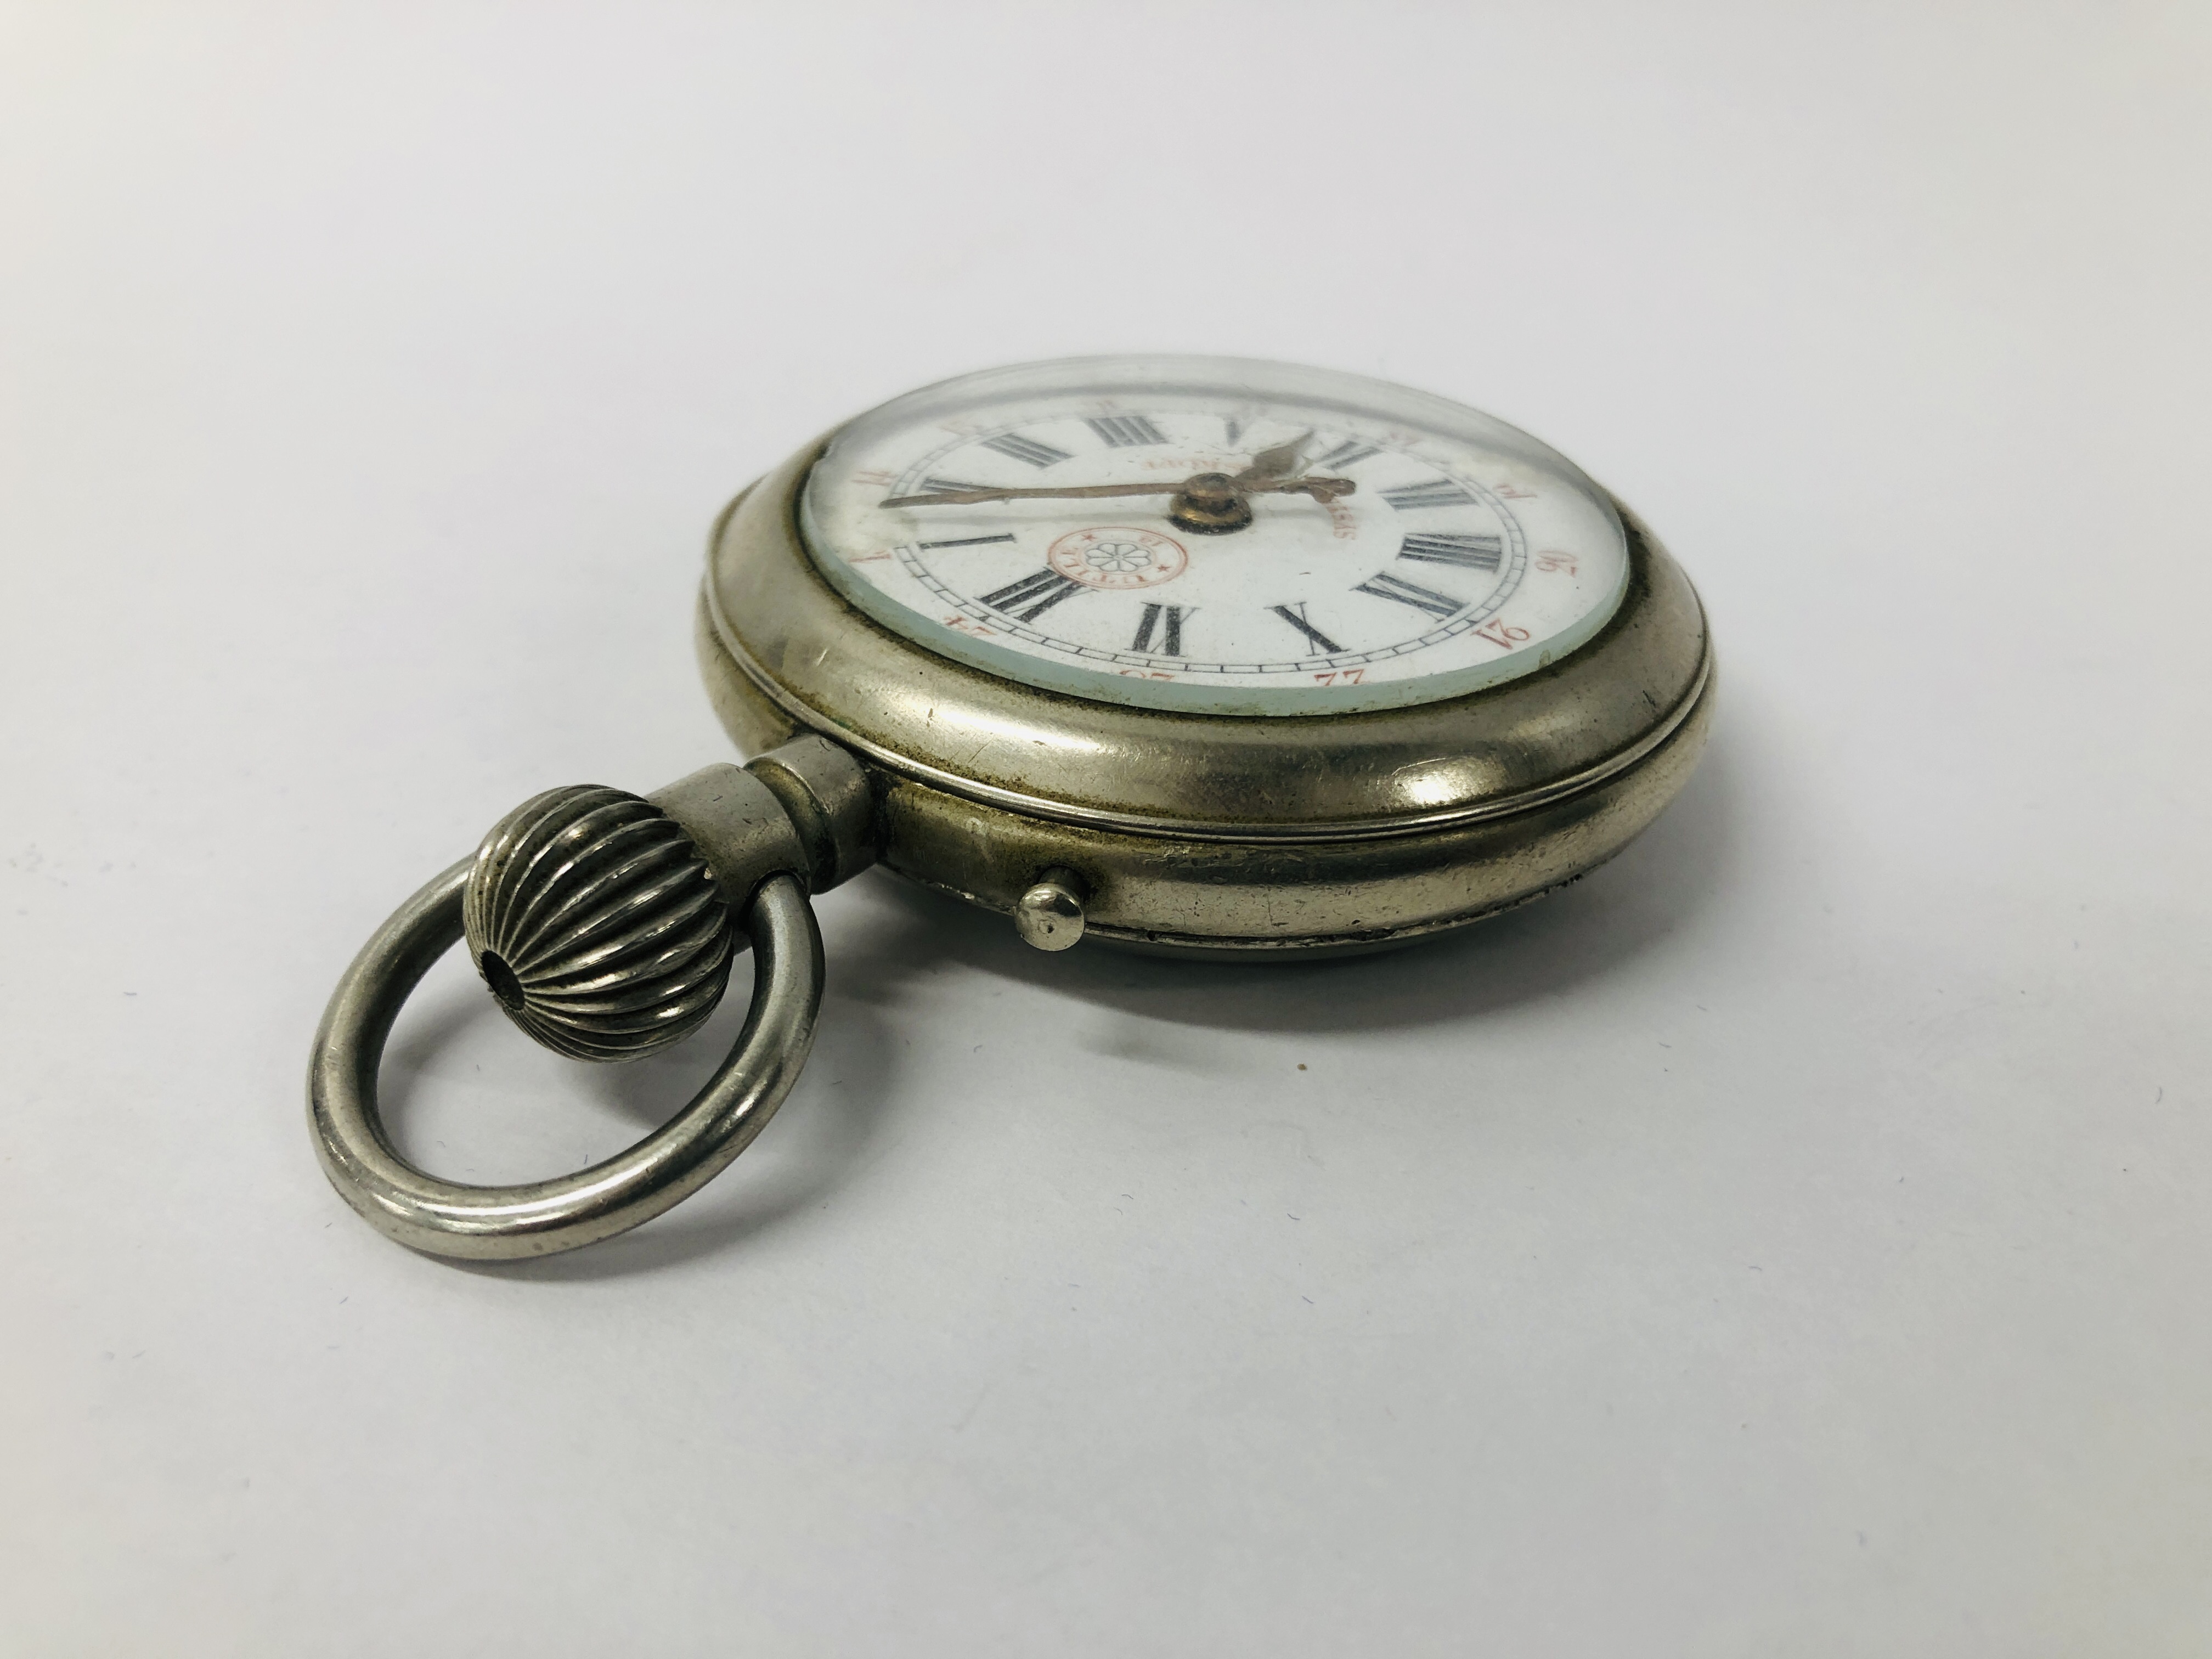 "ROSSKOPF" SYSTEME SWISS MADE POCKET WATCH, ENAMELLED DIAL A/F D 6CM. - Image 4 of 7